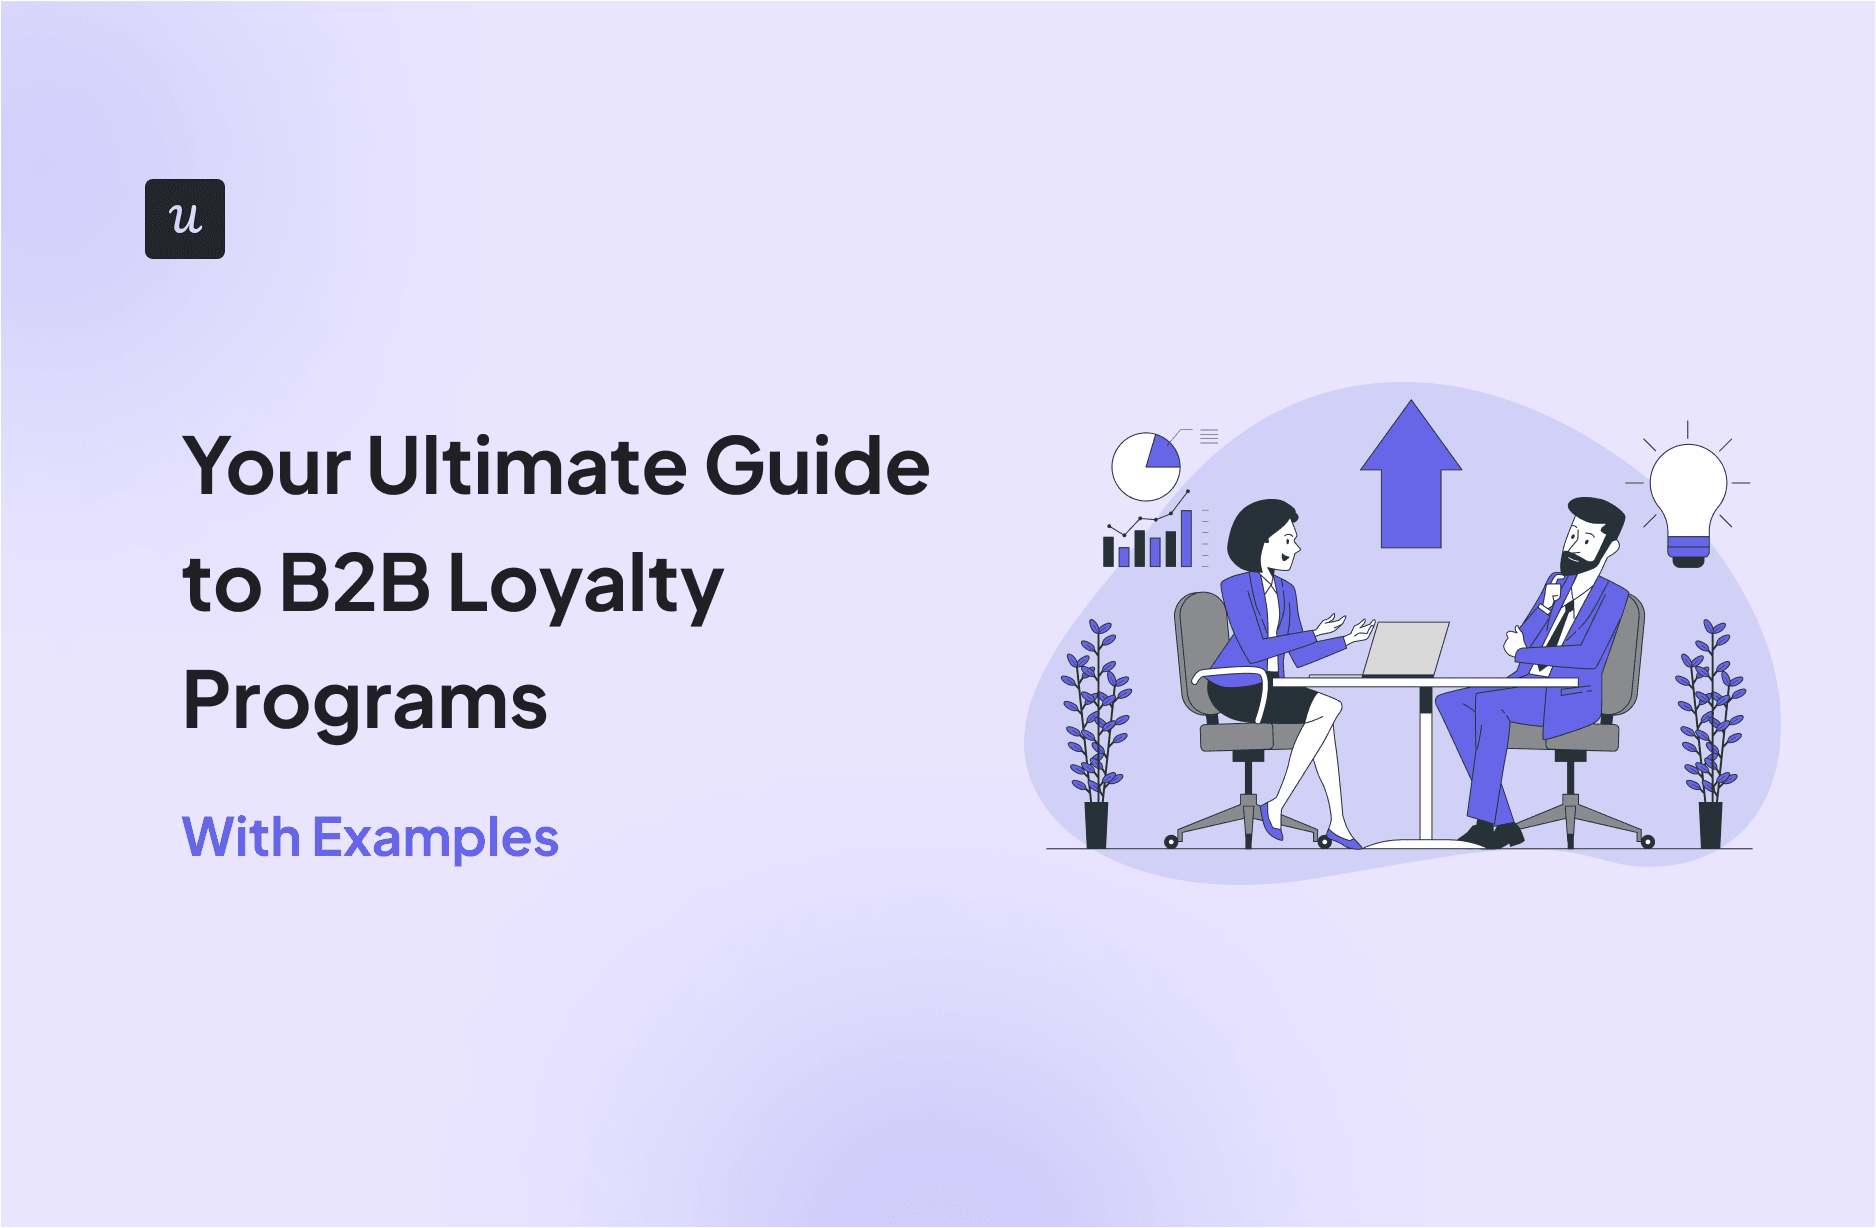 Your Ultimate Guide to B2B Loyalty Programs [With Examples] cover